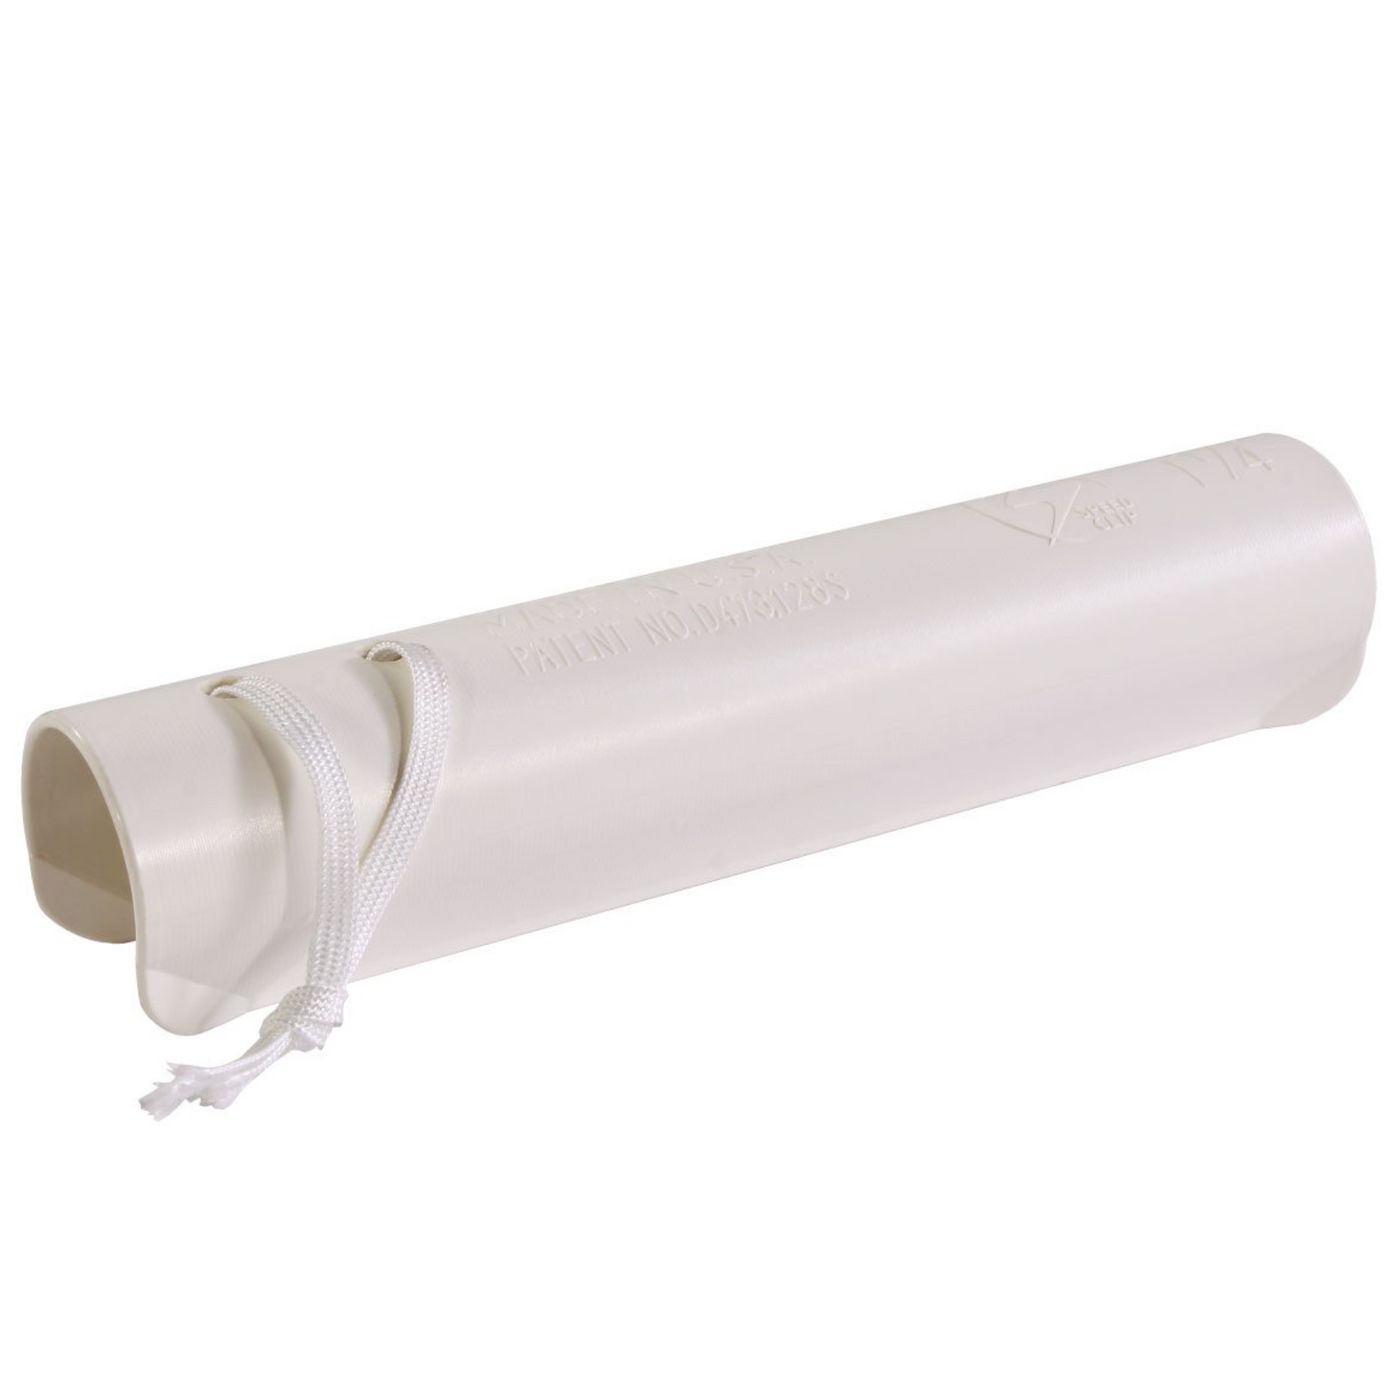 1-1/4-inch White Speed Clip for Speed-Rail®